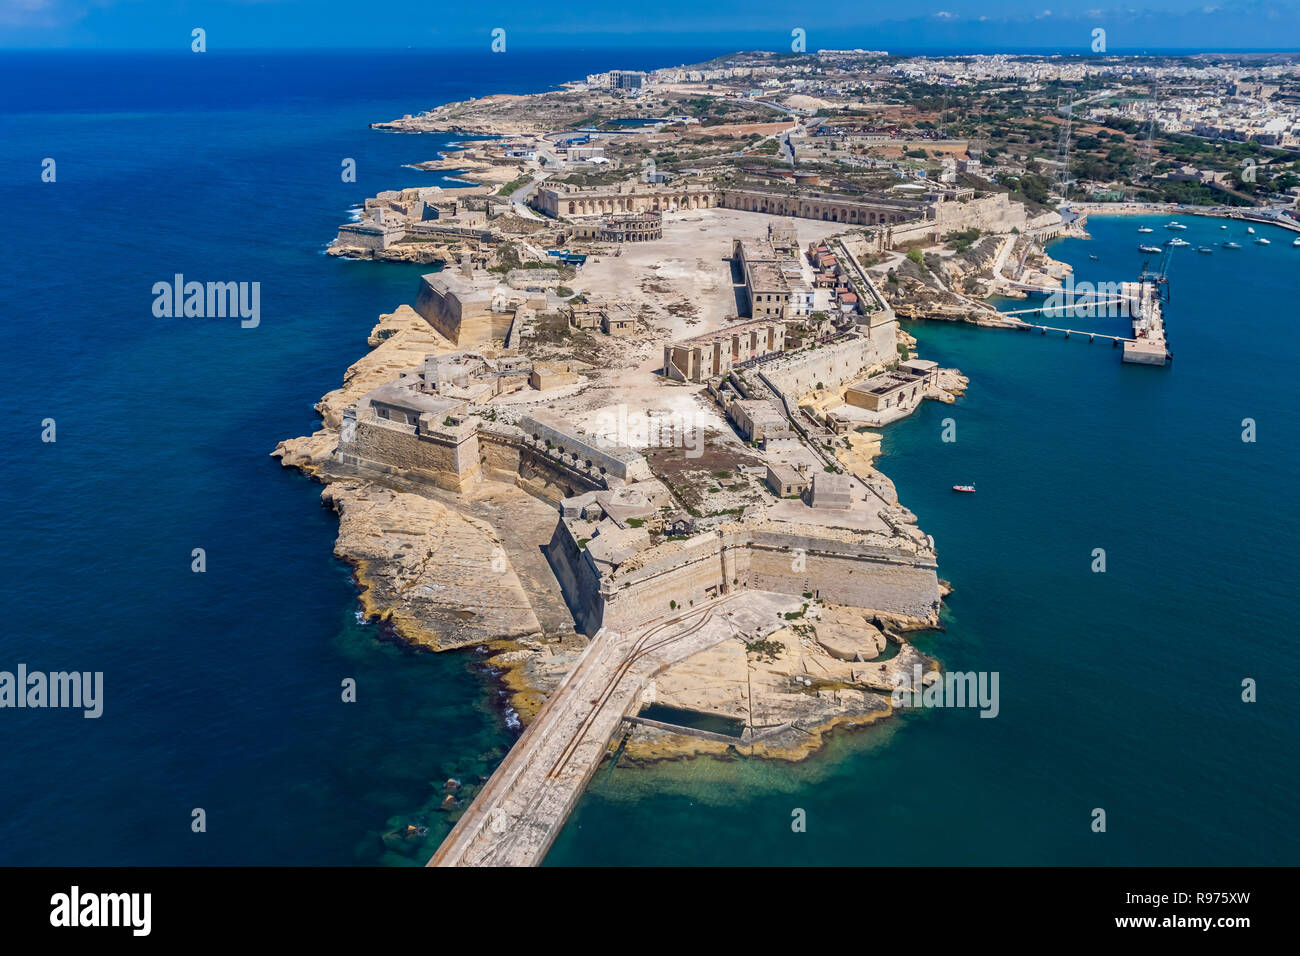 Fort Ricasoli aerial view. Island of Malta from above. Bastioned fort built by the Order of Saint John in Kalkara, Malta. Gallows' Point, north shore of Rinella Bay, entrance to the Grand Harbour Stock Photo